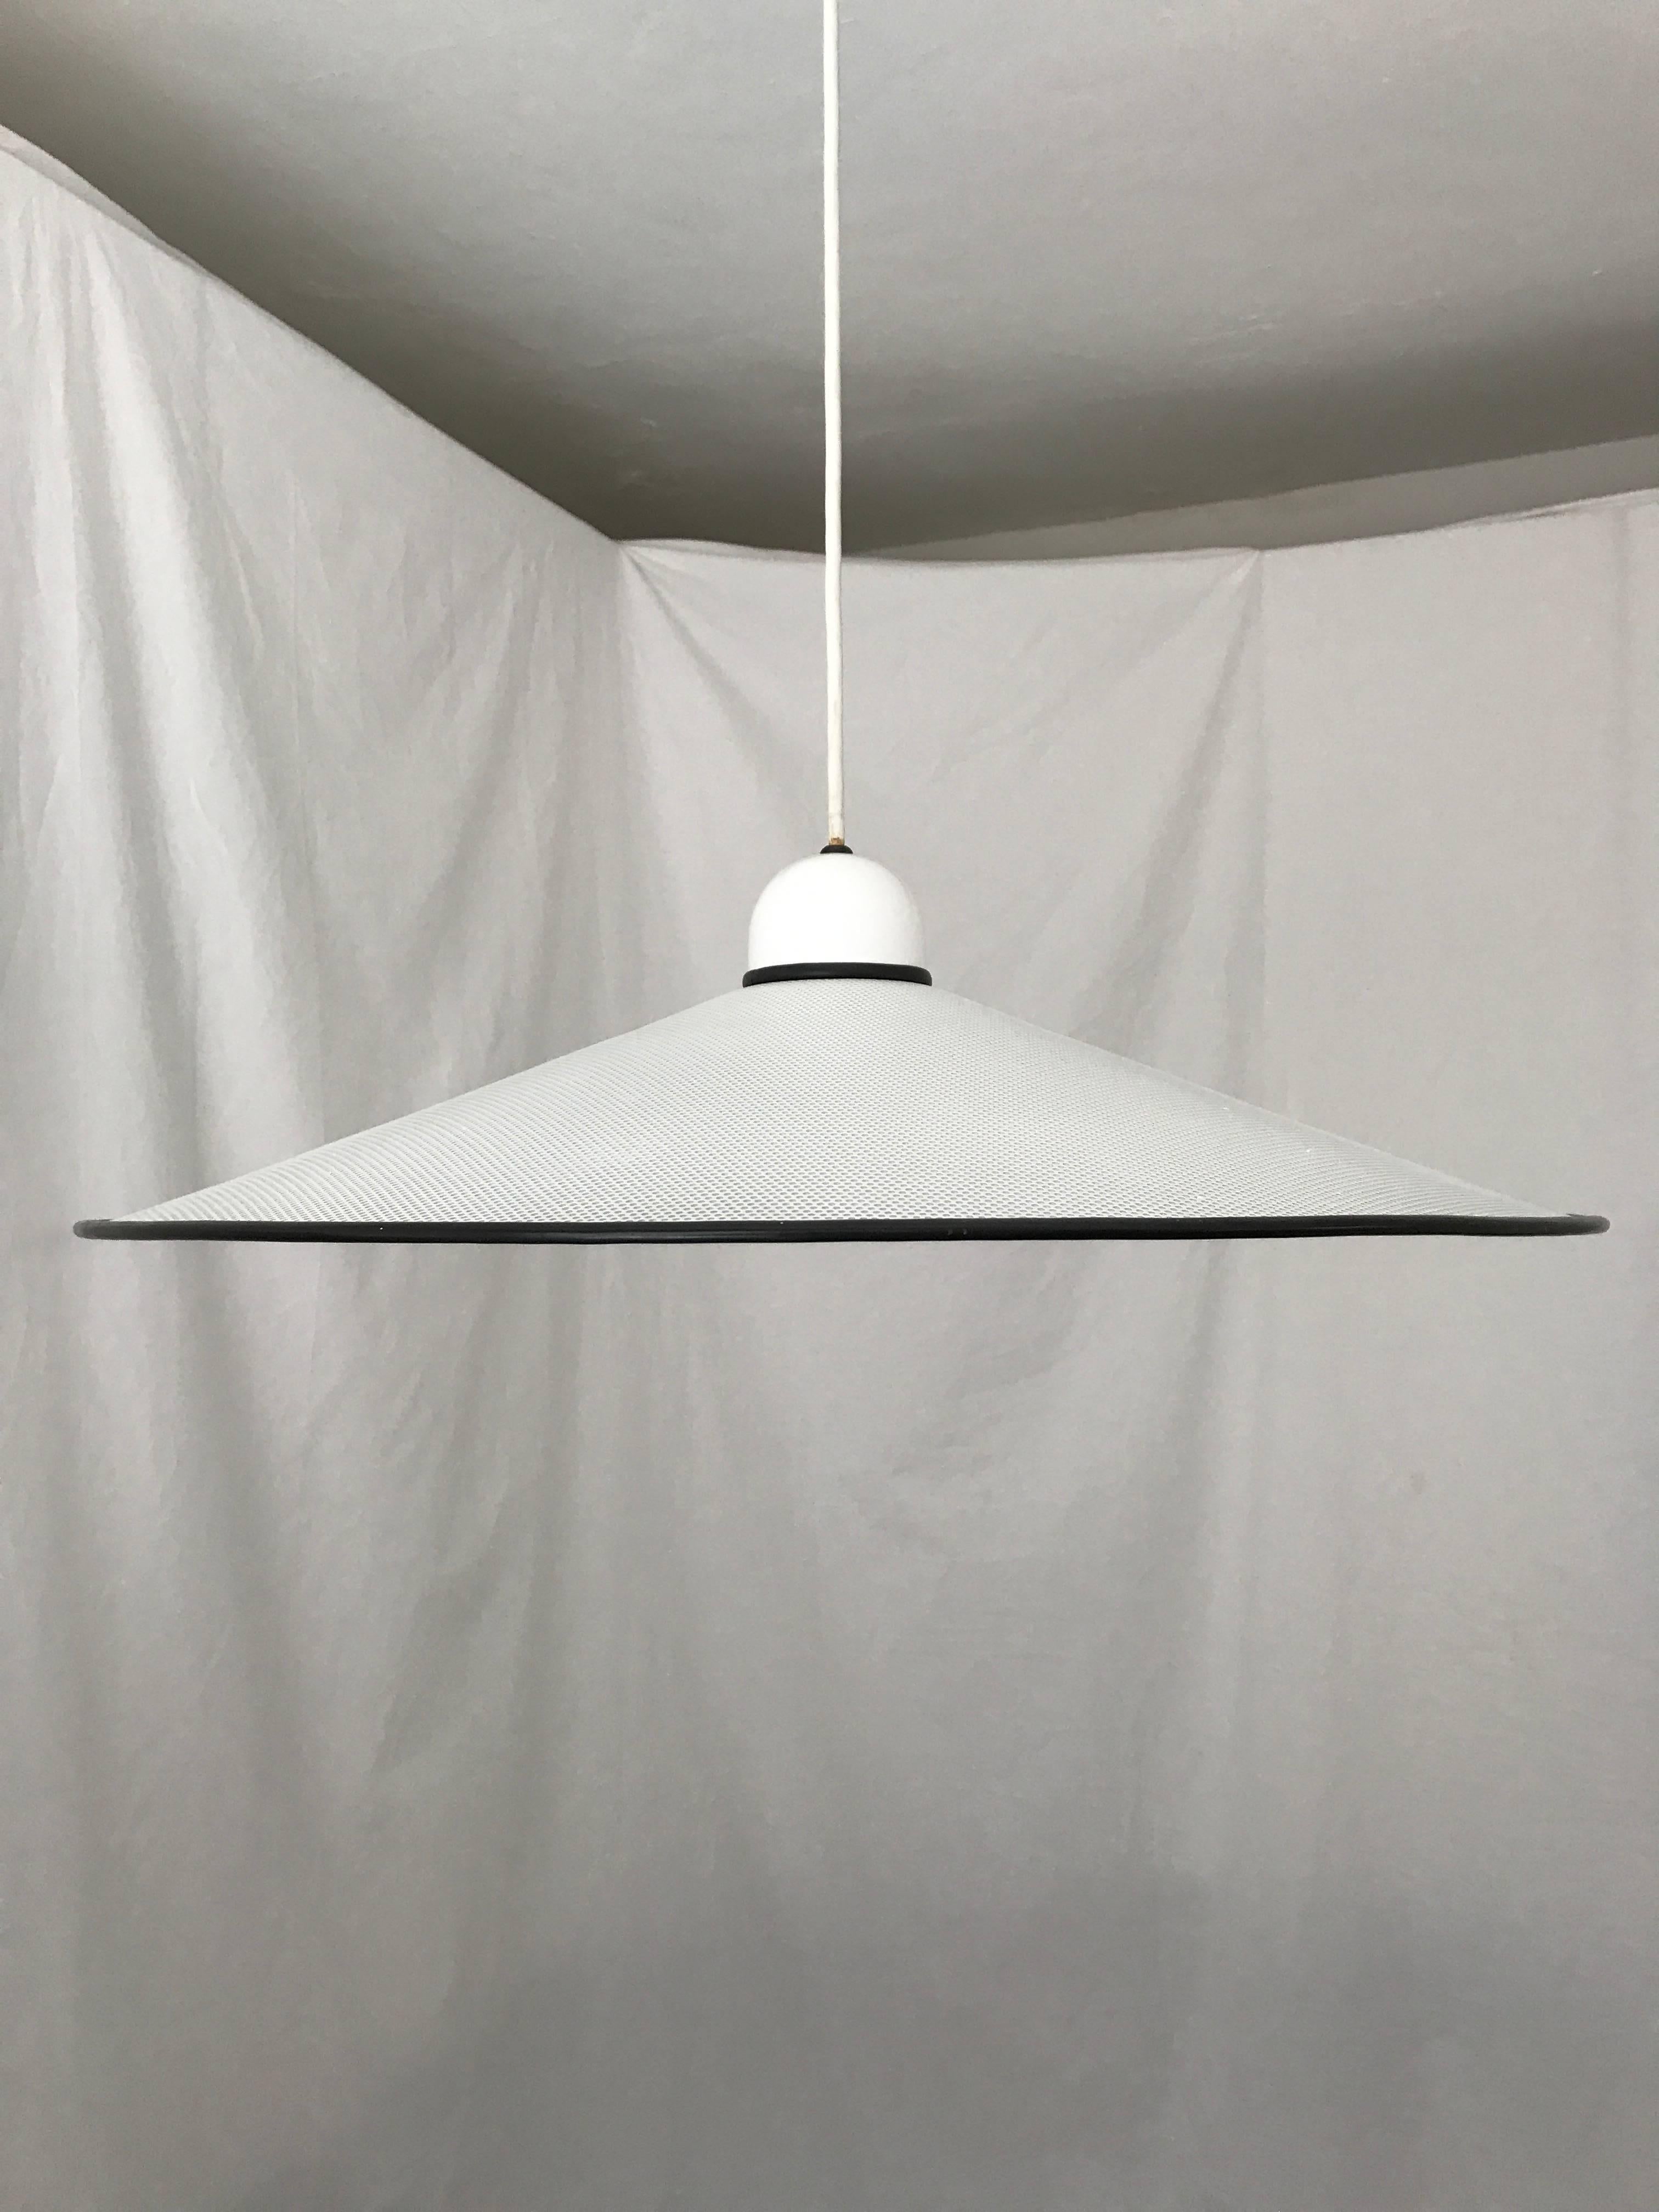 White and black pendant lamp with perforated shade by Ron Rezek. Height is adjustable up to 37 inches.